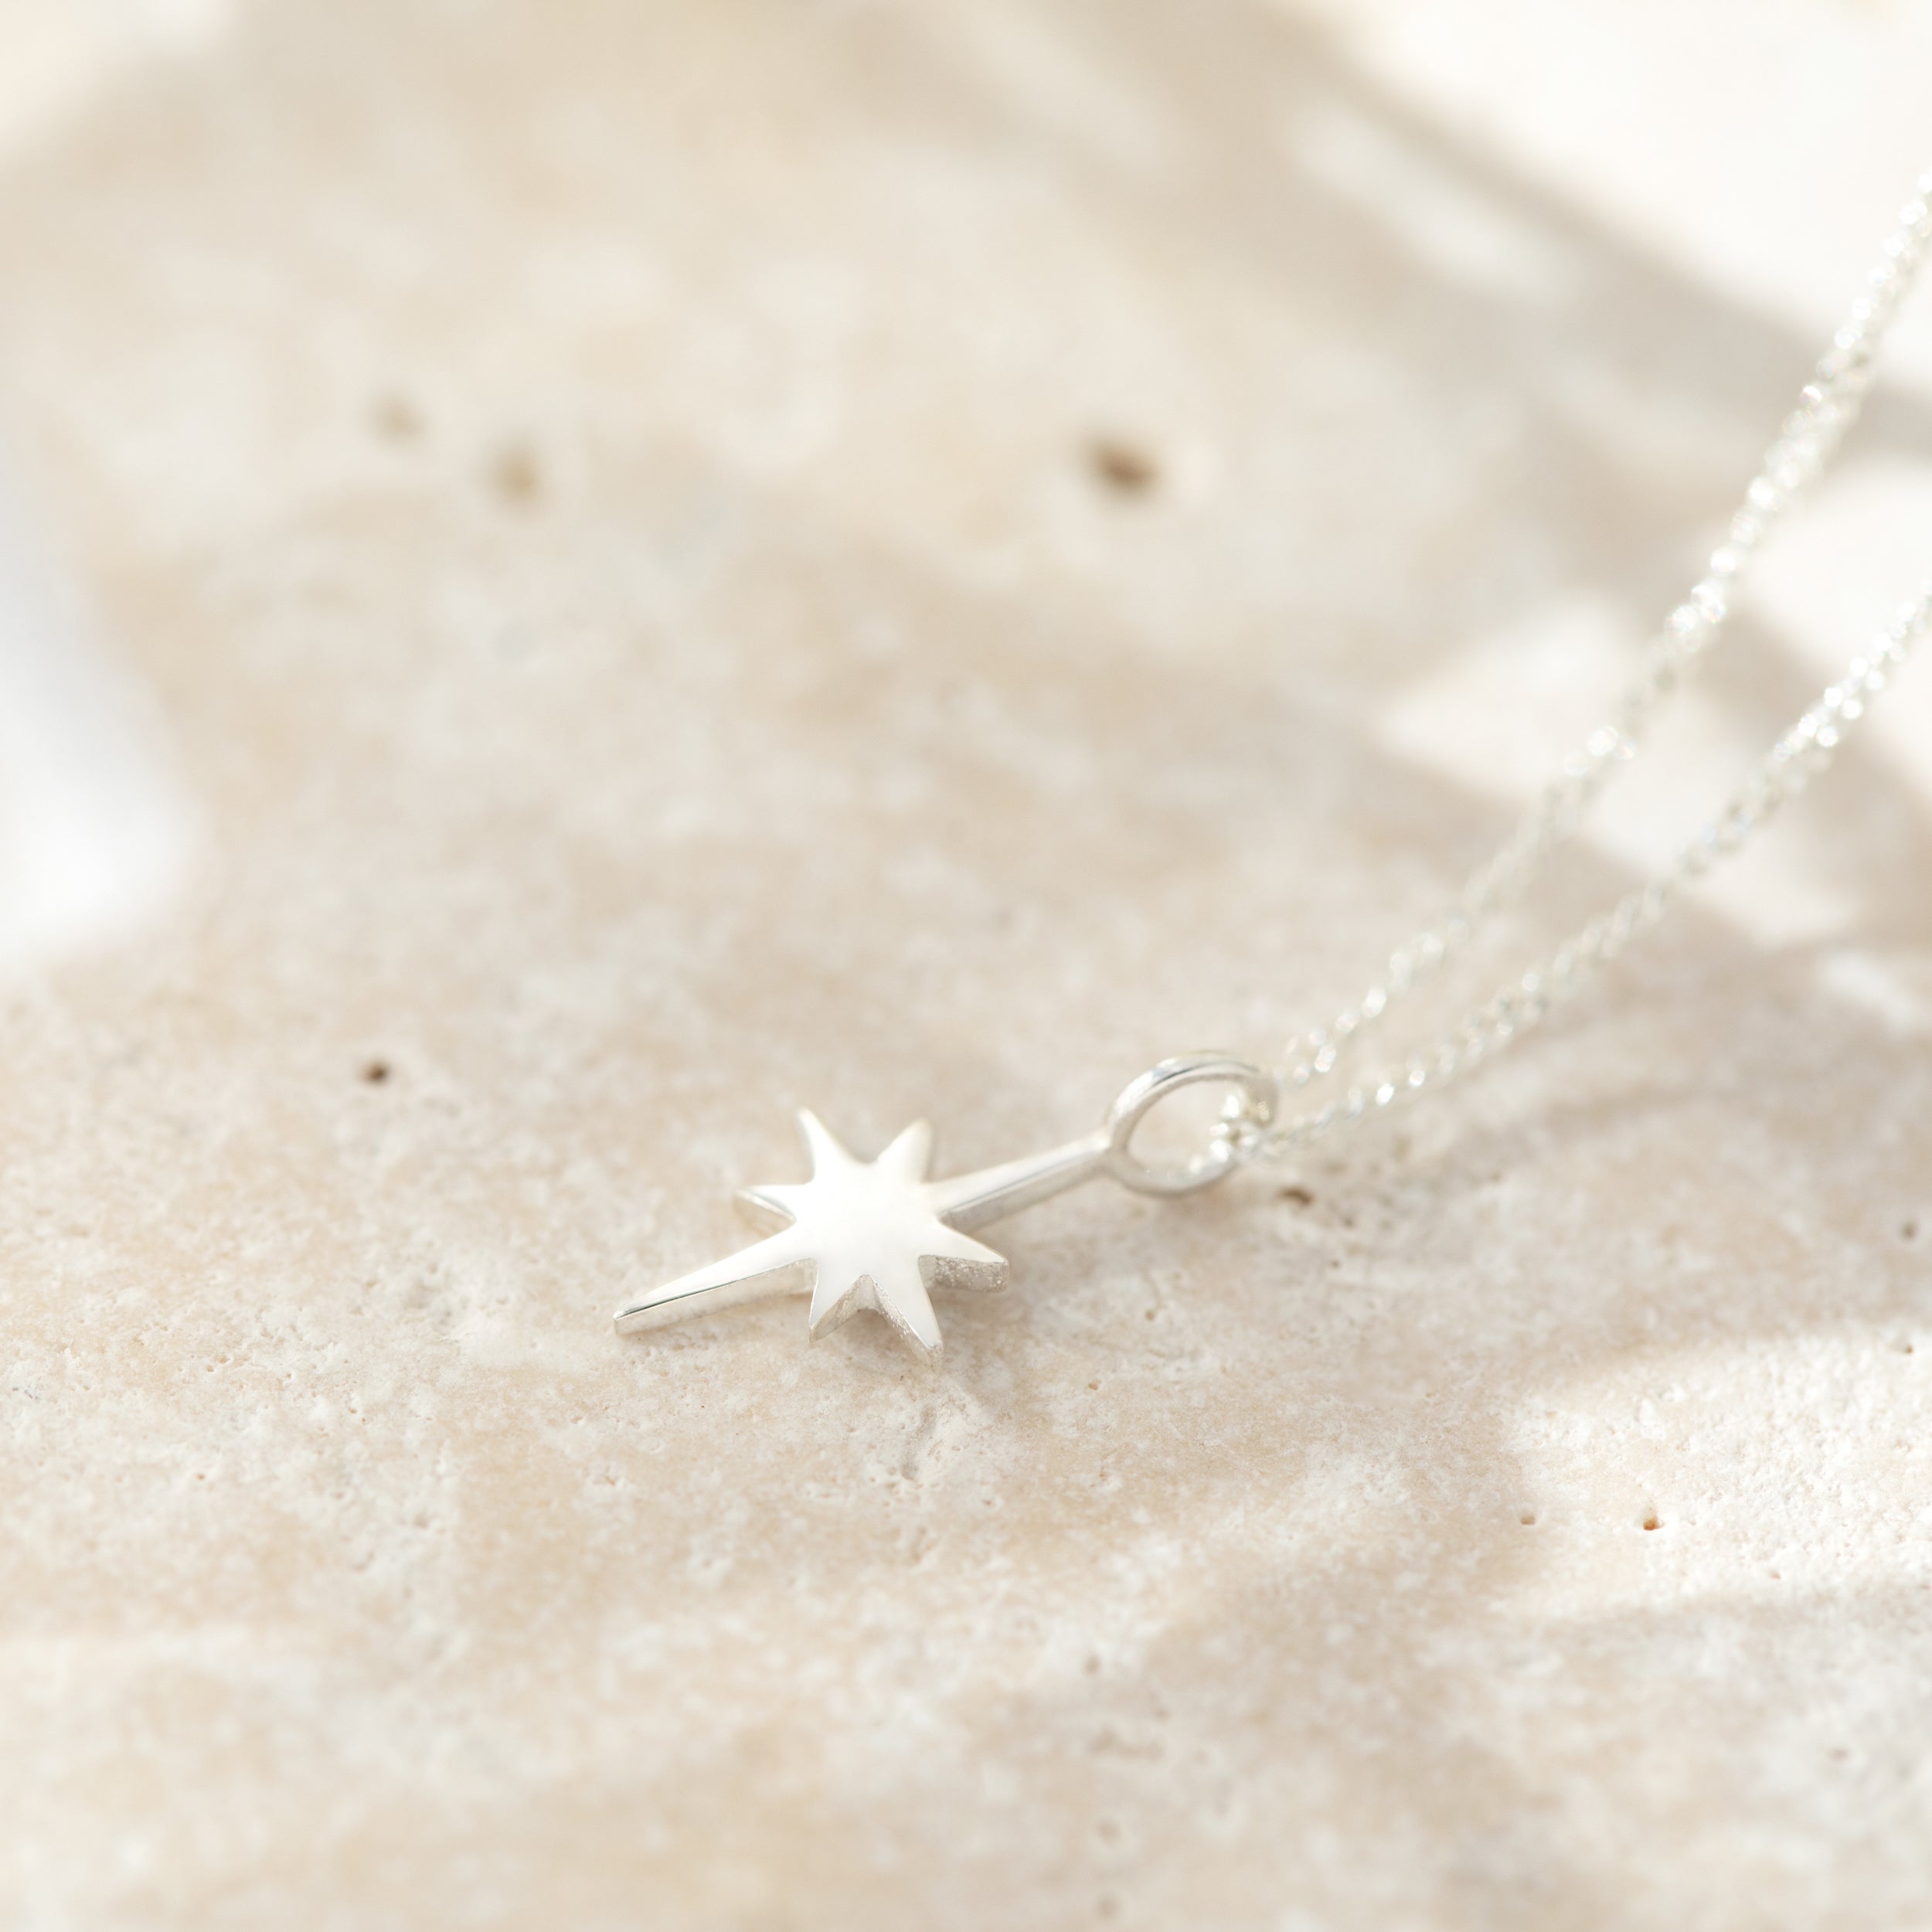 North Star Necklace in Sterling Silver